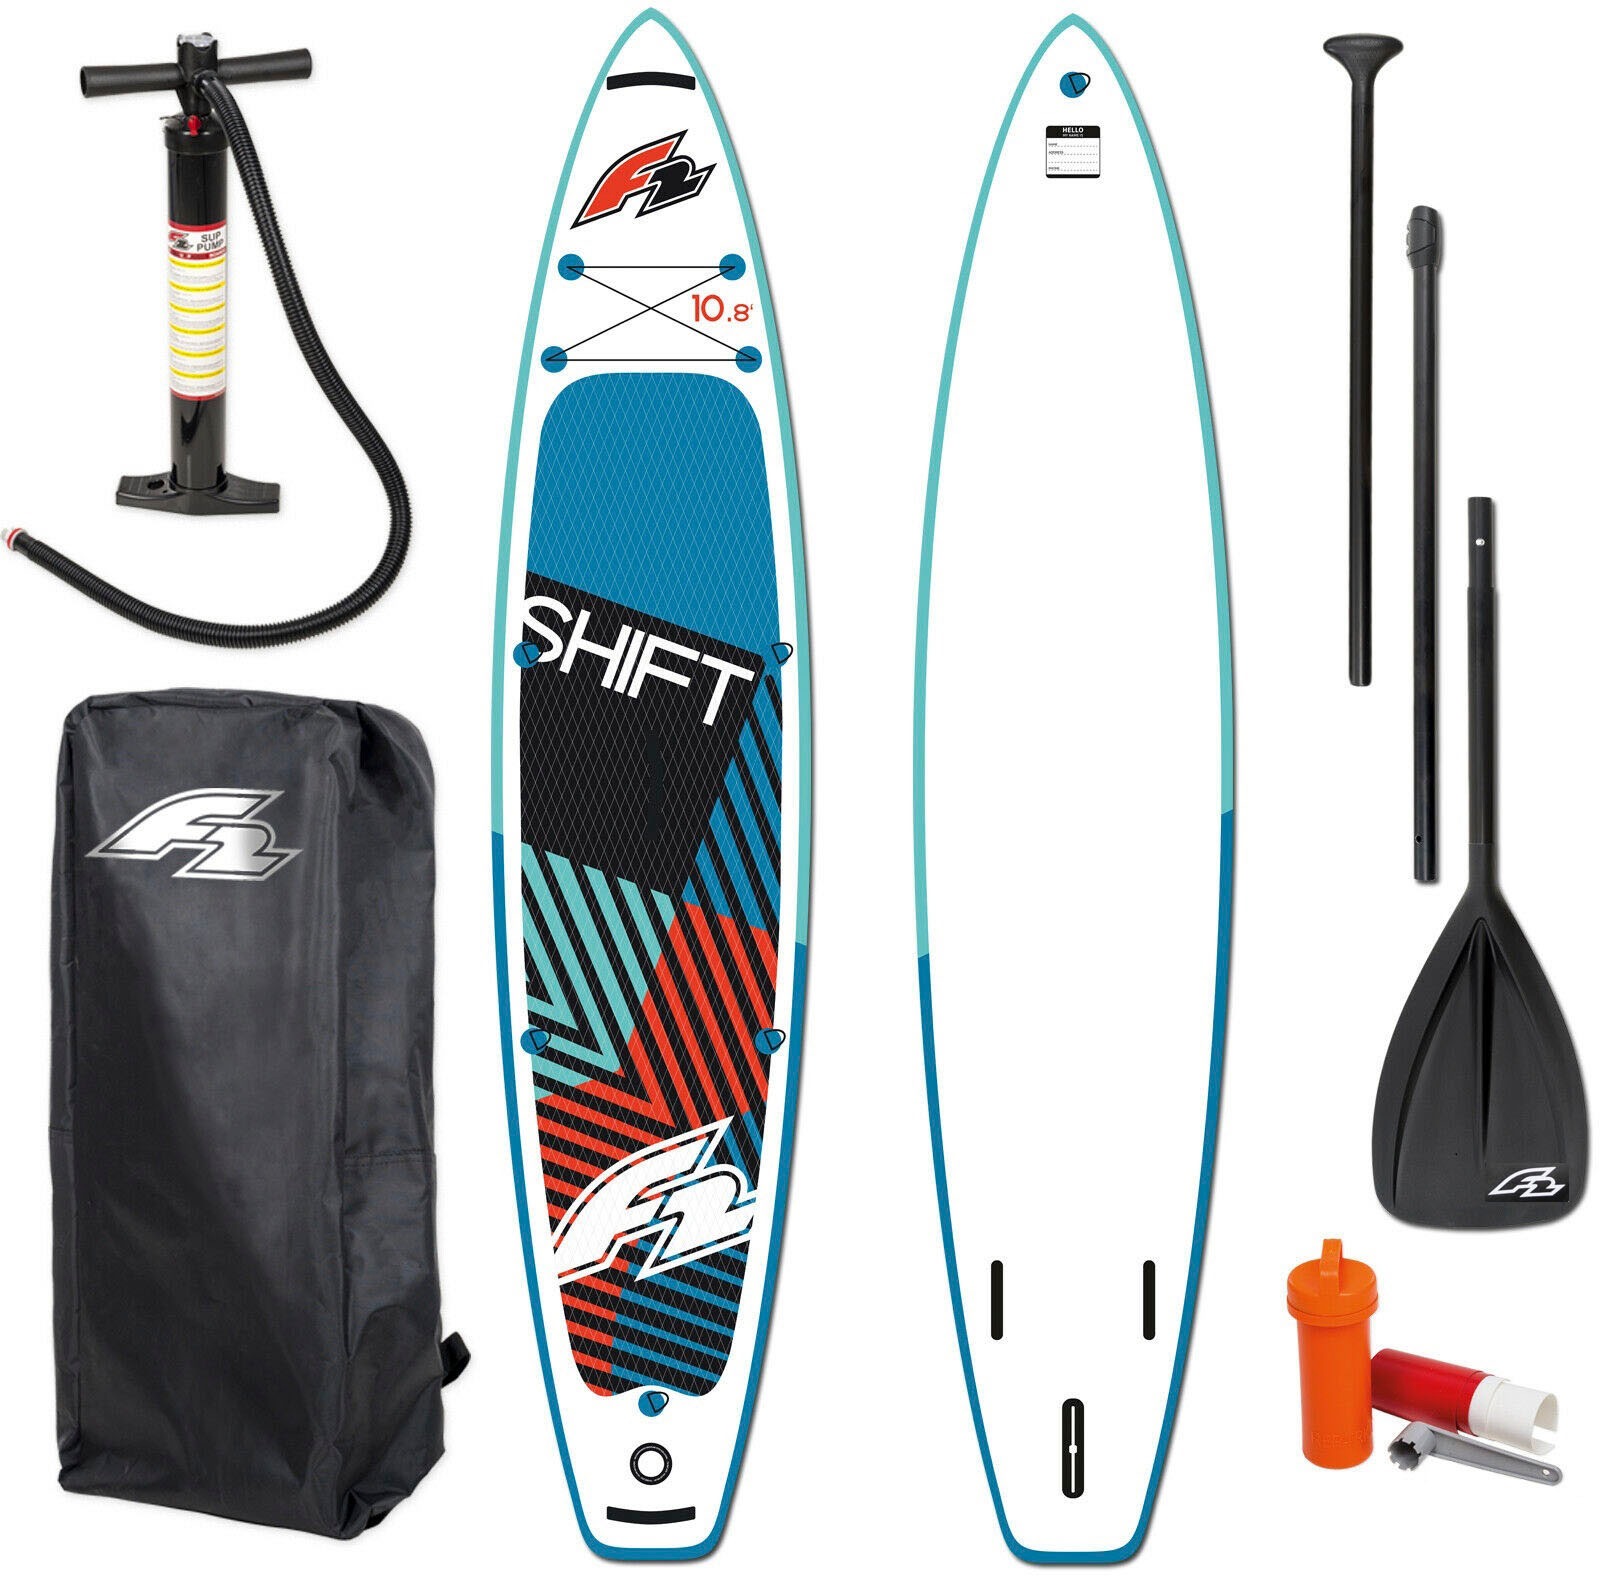 Shop 5 Online 10,8«, SUP-Board Inflatable F2 OTTO »Shift im (Packung, tlg.)